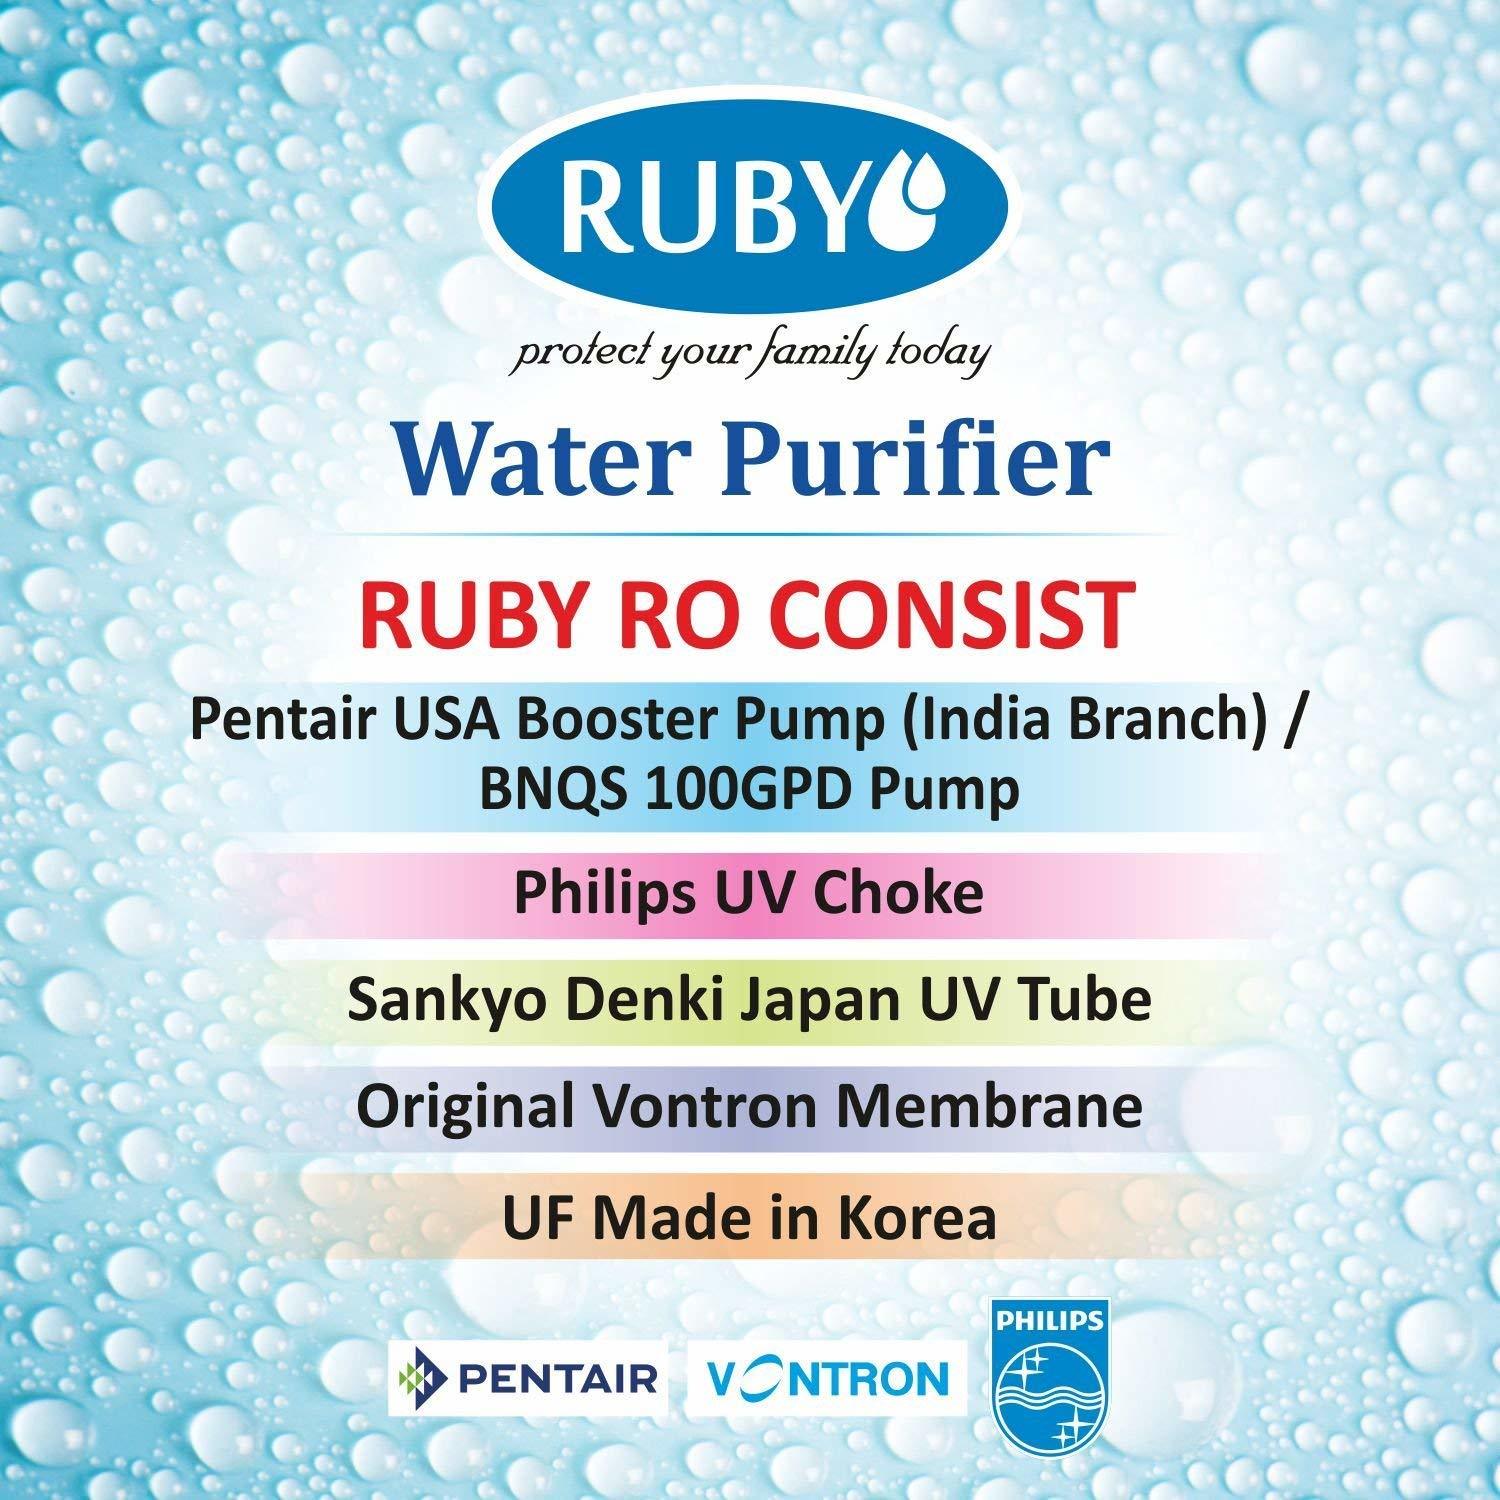 Ruby Water Purifier RO+UV+UF+MAT+TDS Controller 12 Stage Purification With Storage 12 Litres suitable for home and office Use With Pre-Filter,Sediment Filter,Activated Carbon & Mineral Cartridge